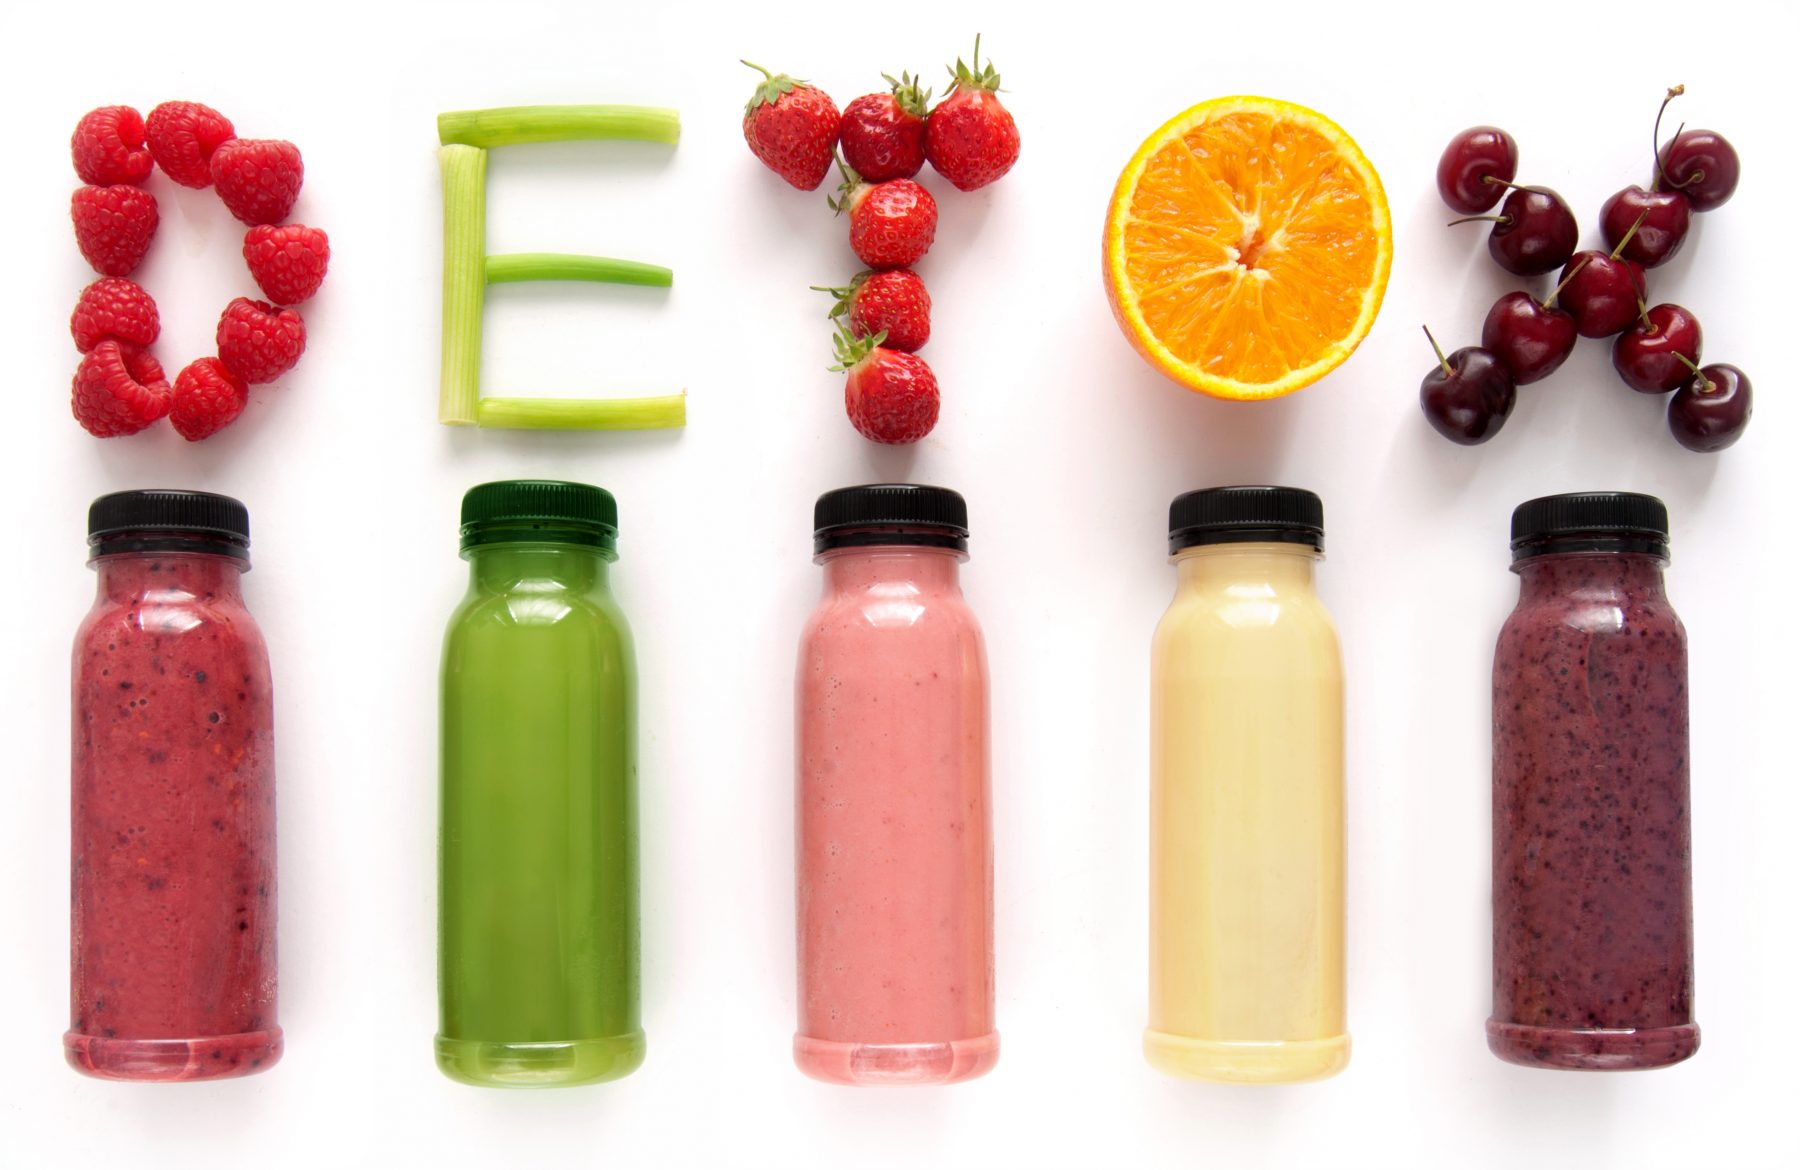 A collection of spring detox juice smoothies